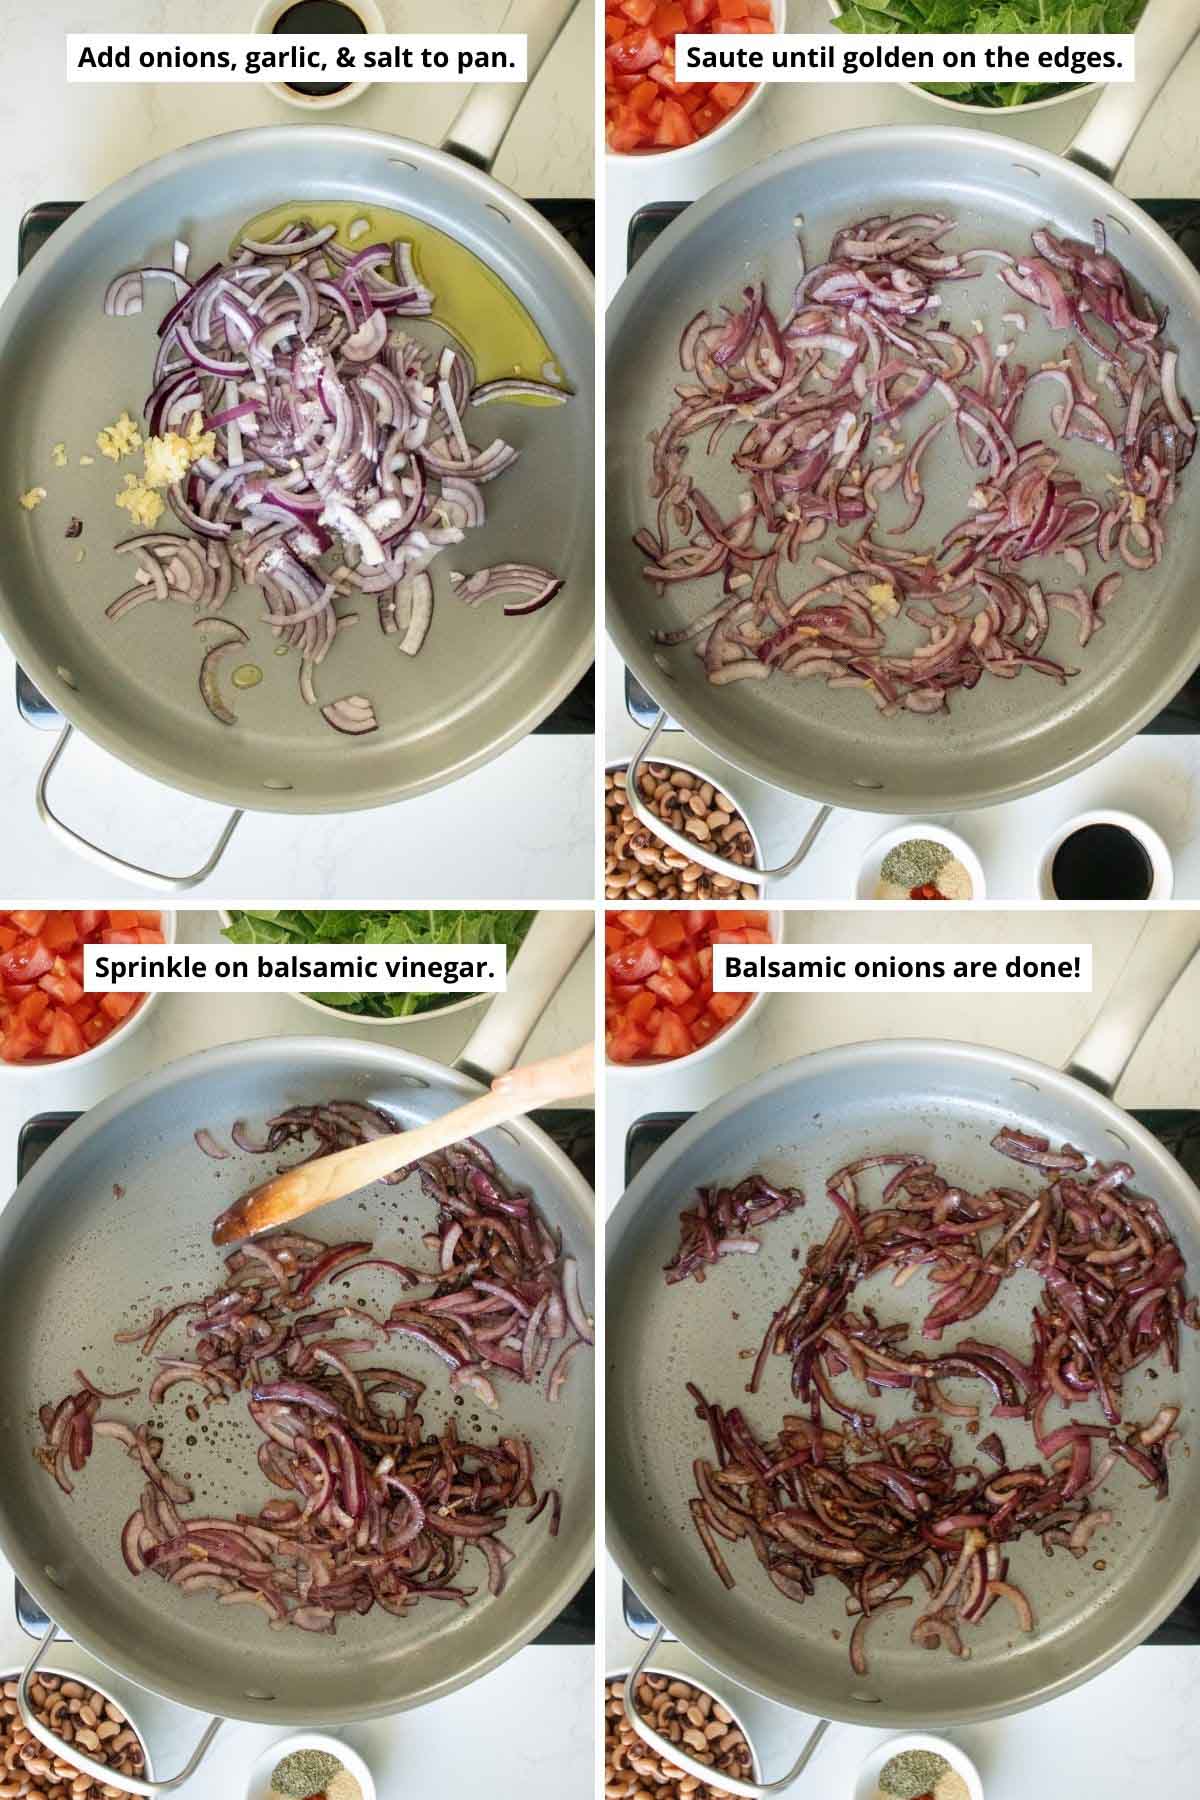 image collage showing the onions before and after sautéing and before and after cooking down the balsamic vinegar